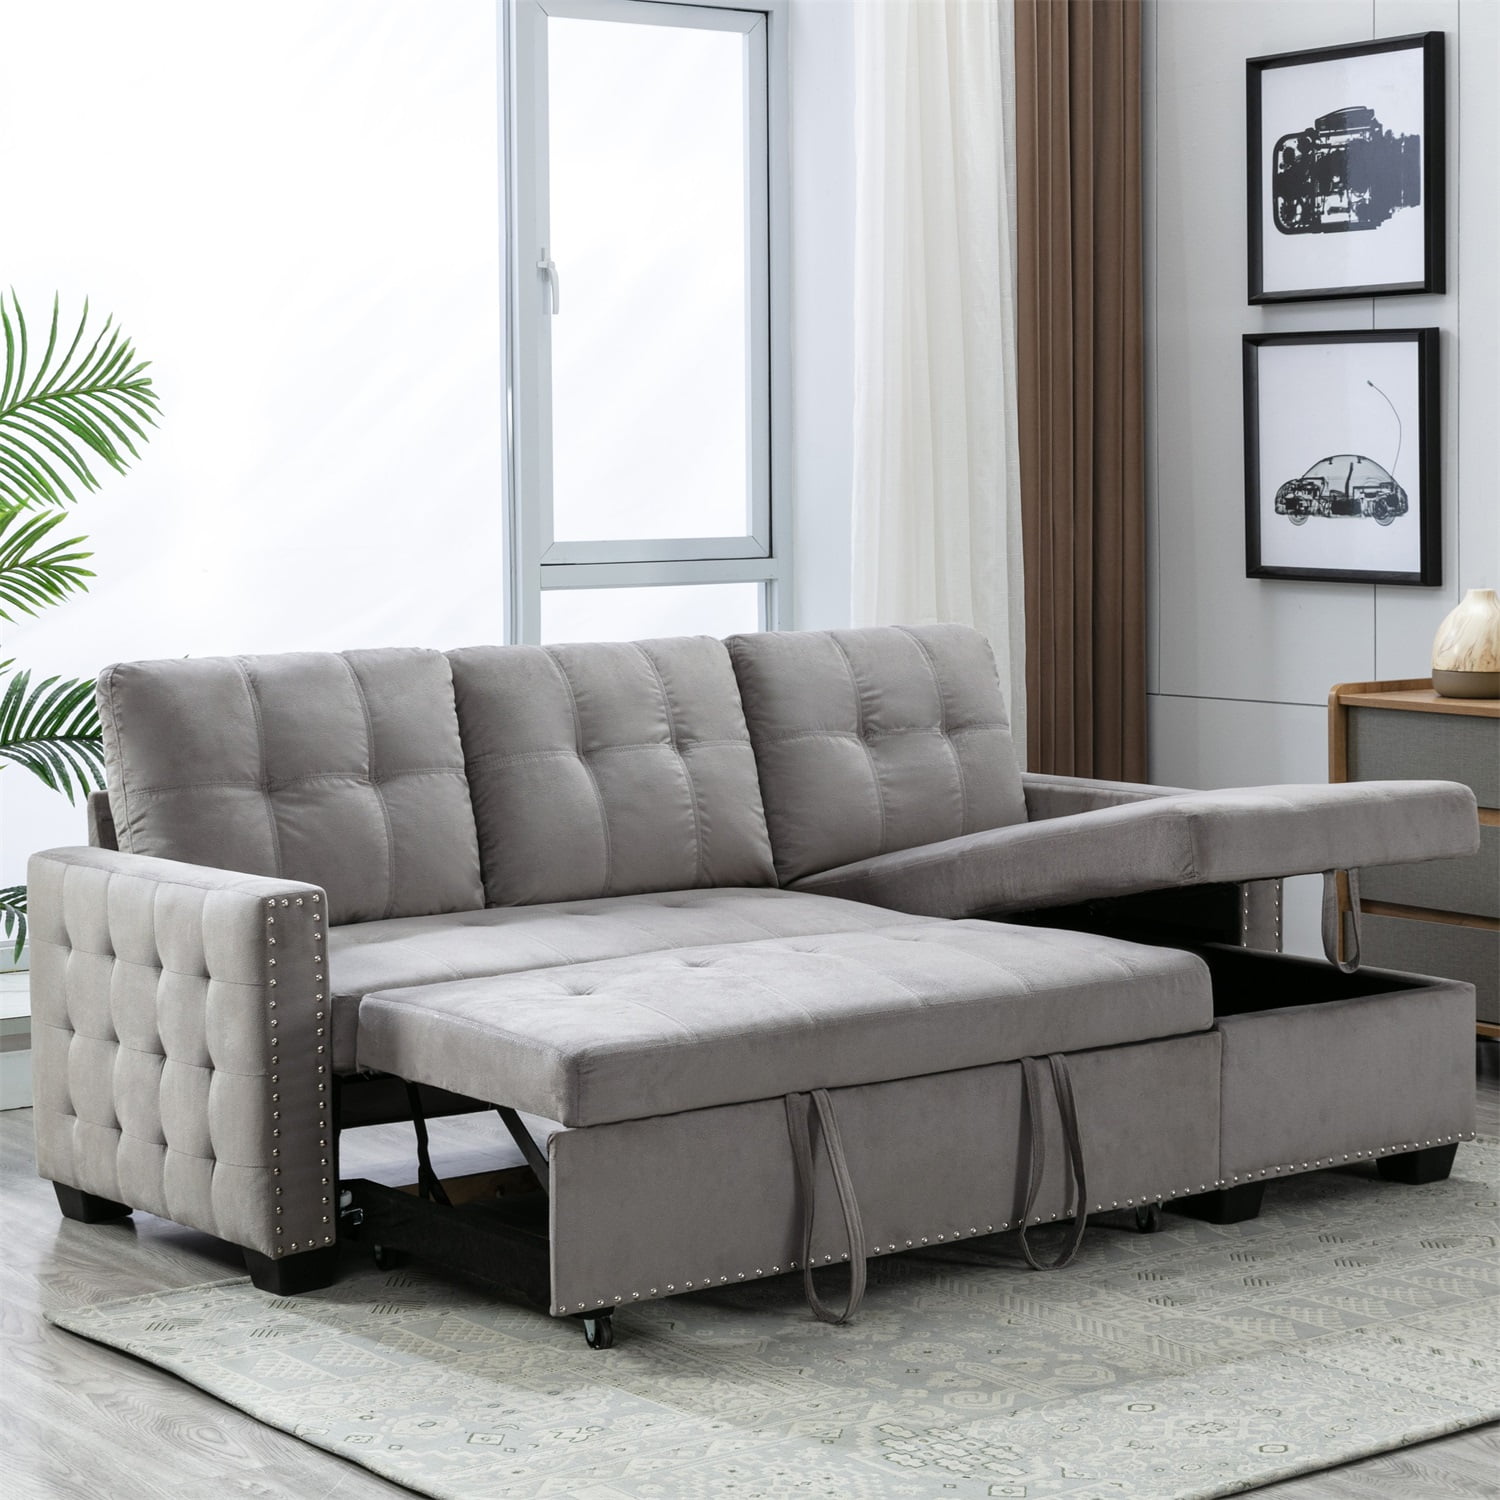 Causal Grey and Brown Plaid Sofa Bed – Overstock Outlet